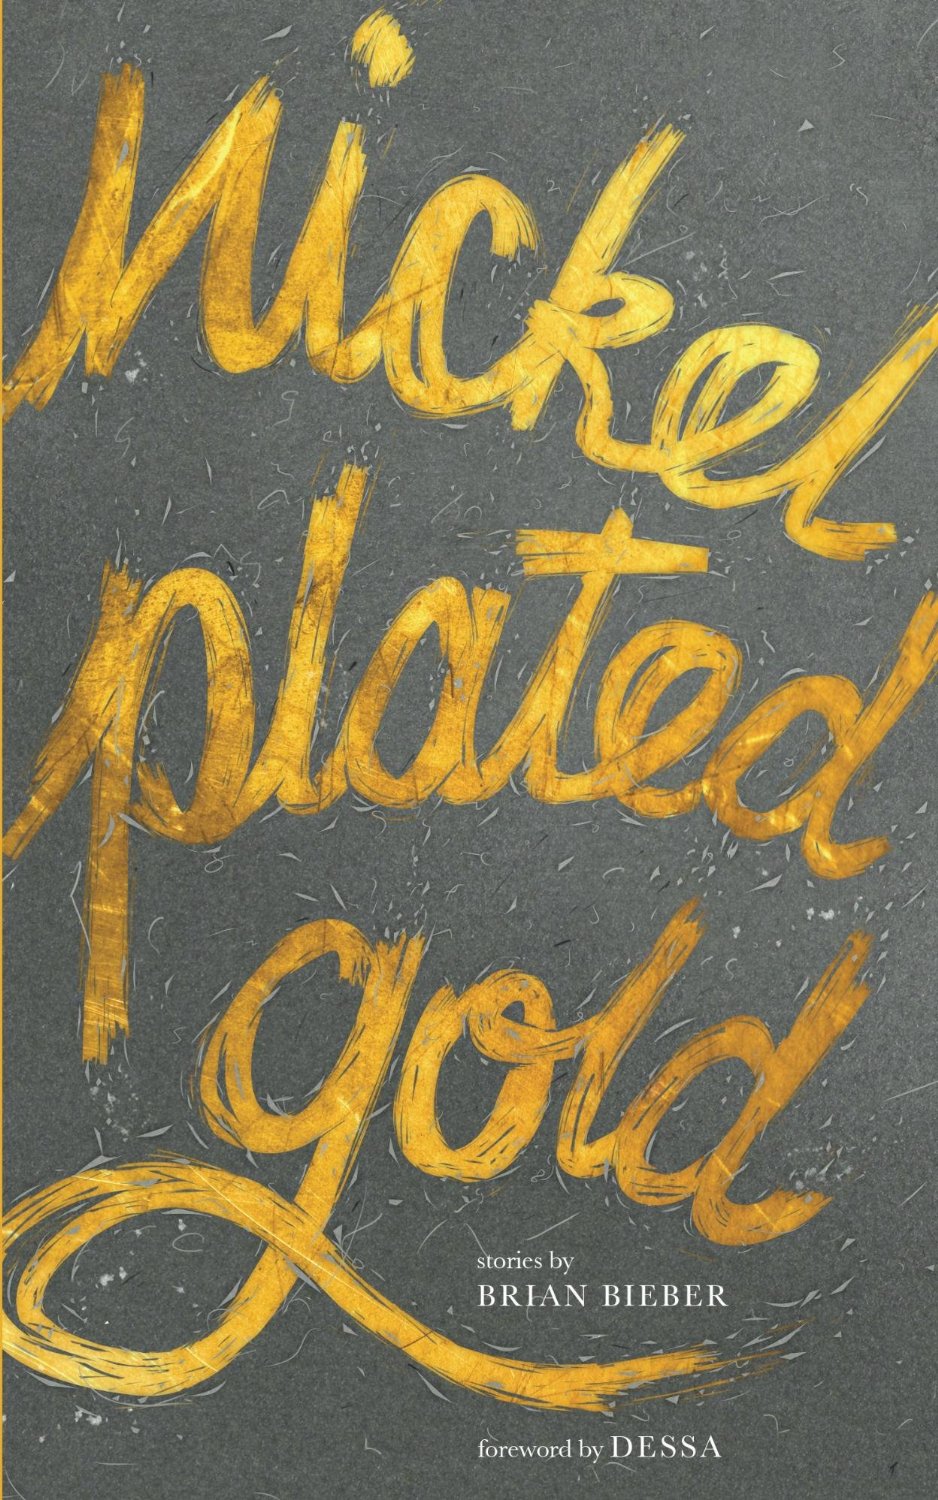 Nickel Plated Gold by Brian Bieber